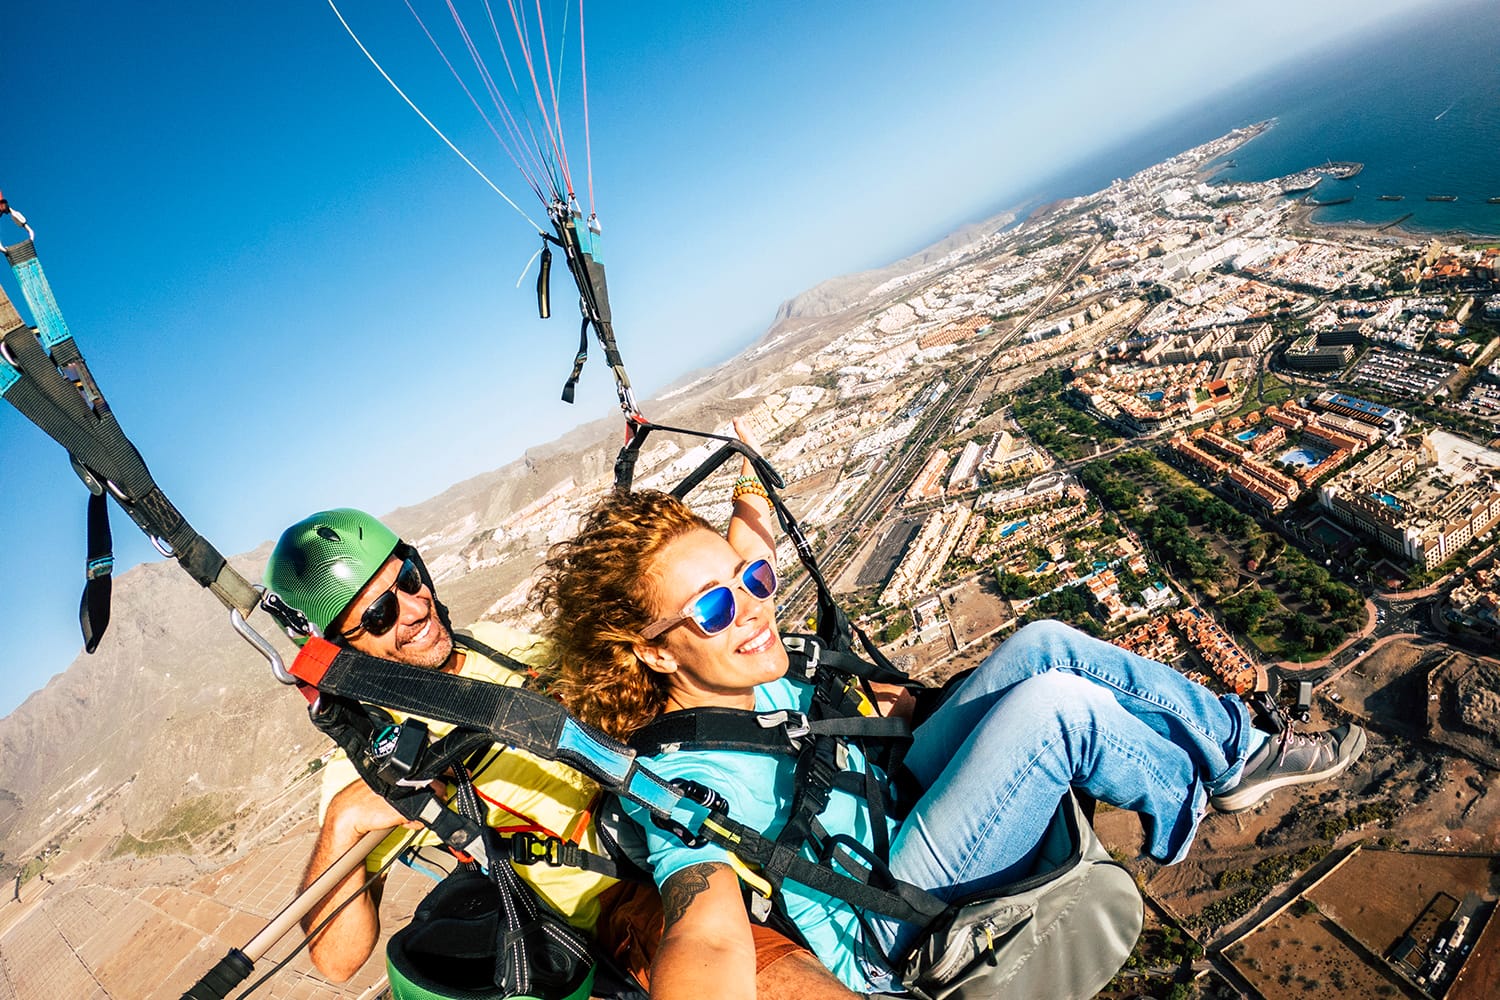 Paragliders in Tenerife, Canary Islands